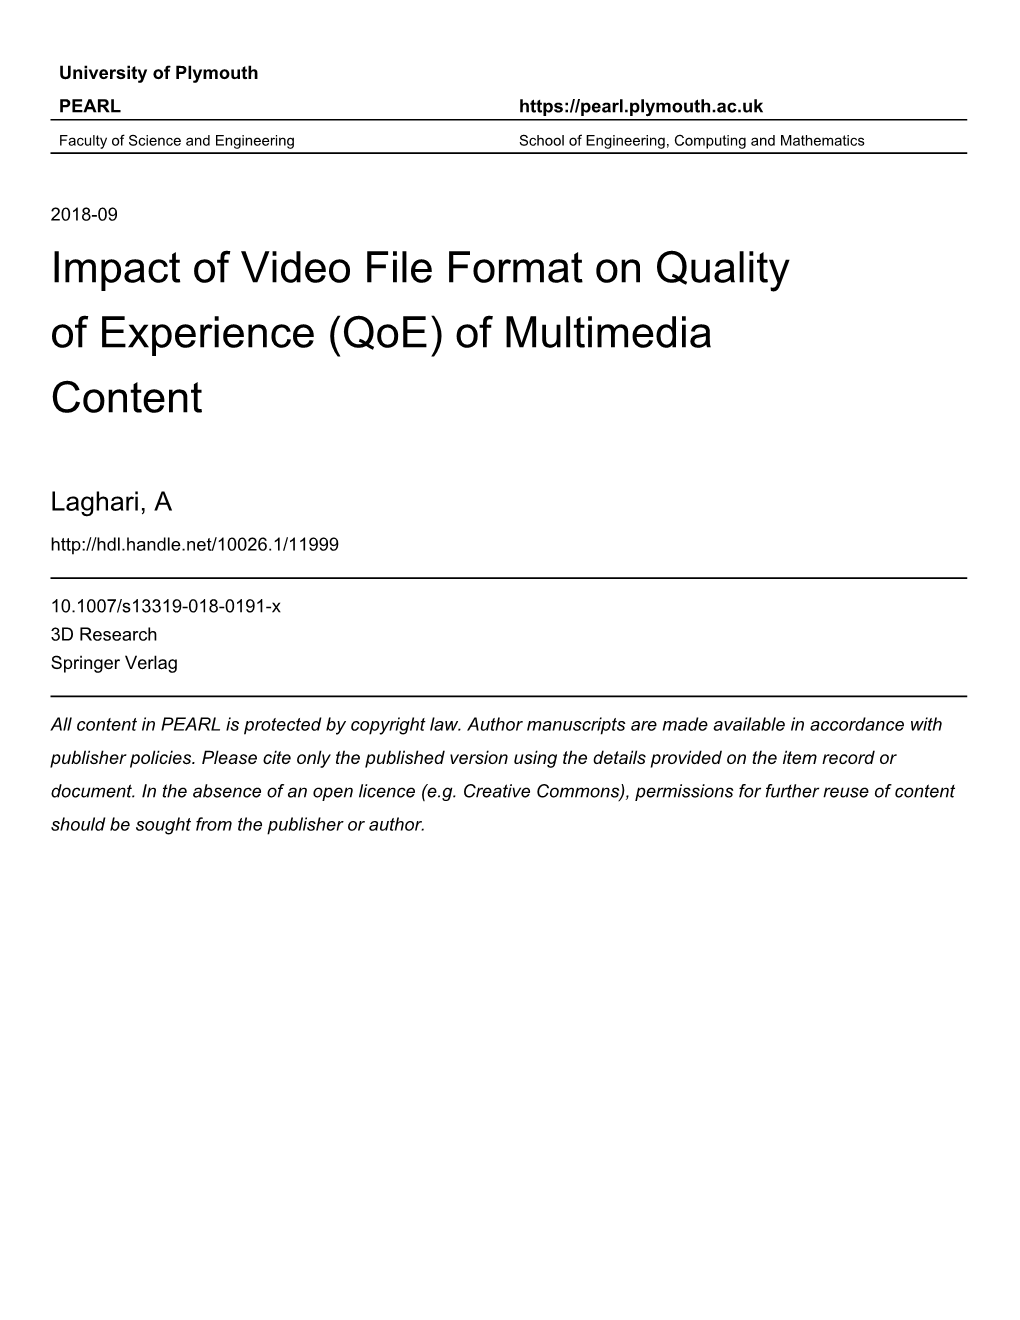 Impact of Video File Format on Quality of Experience (Qoe) of Multimedia Content